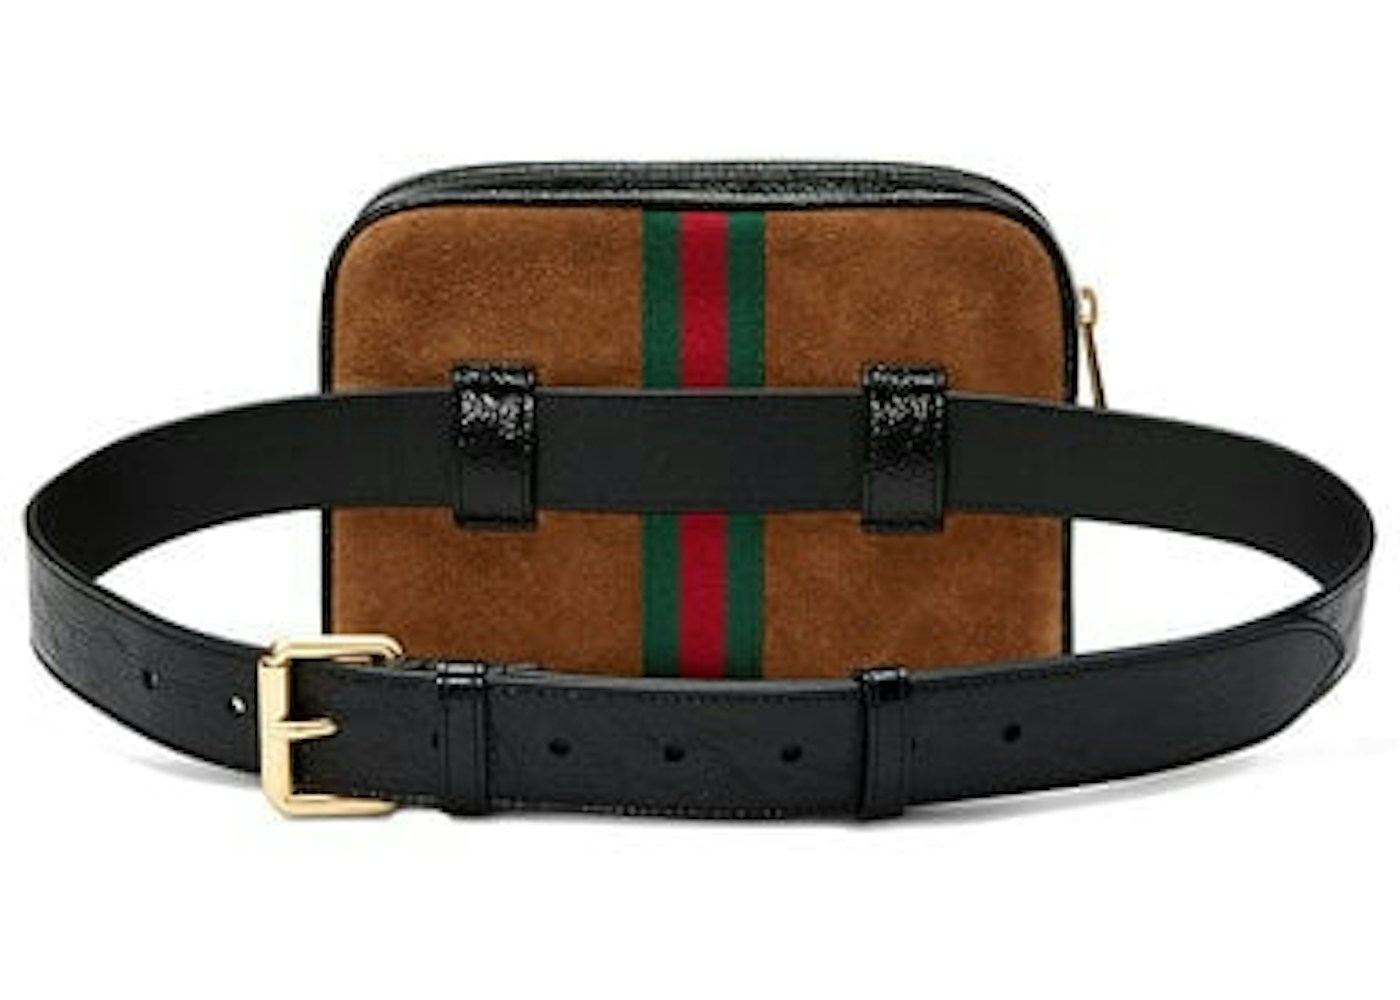 Gucci Ophidia Belt Bag Small Chesnut in Suede/Patent Leather with Gold-Tone